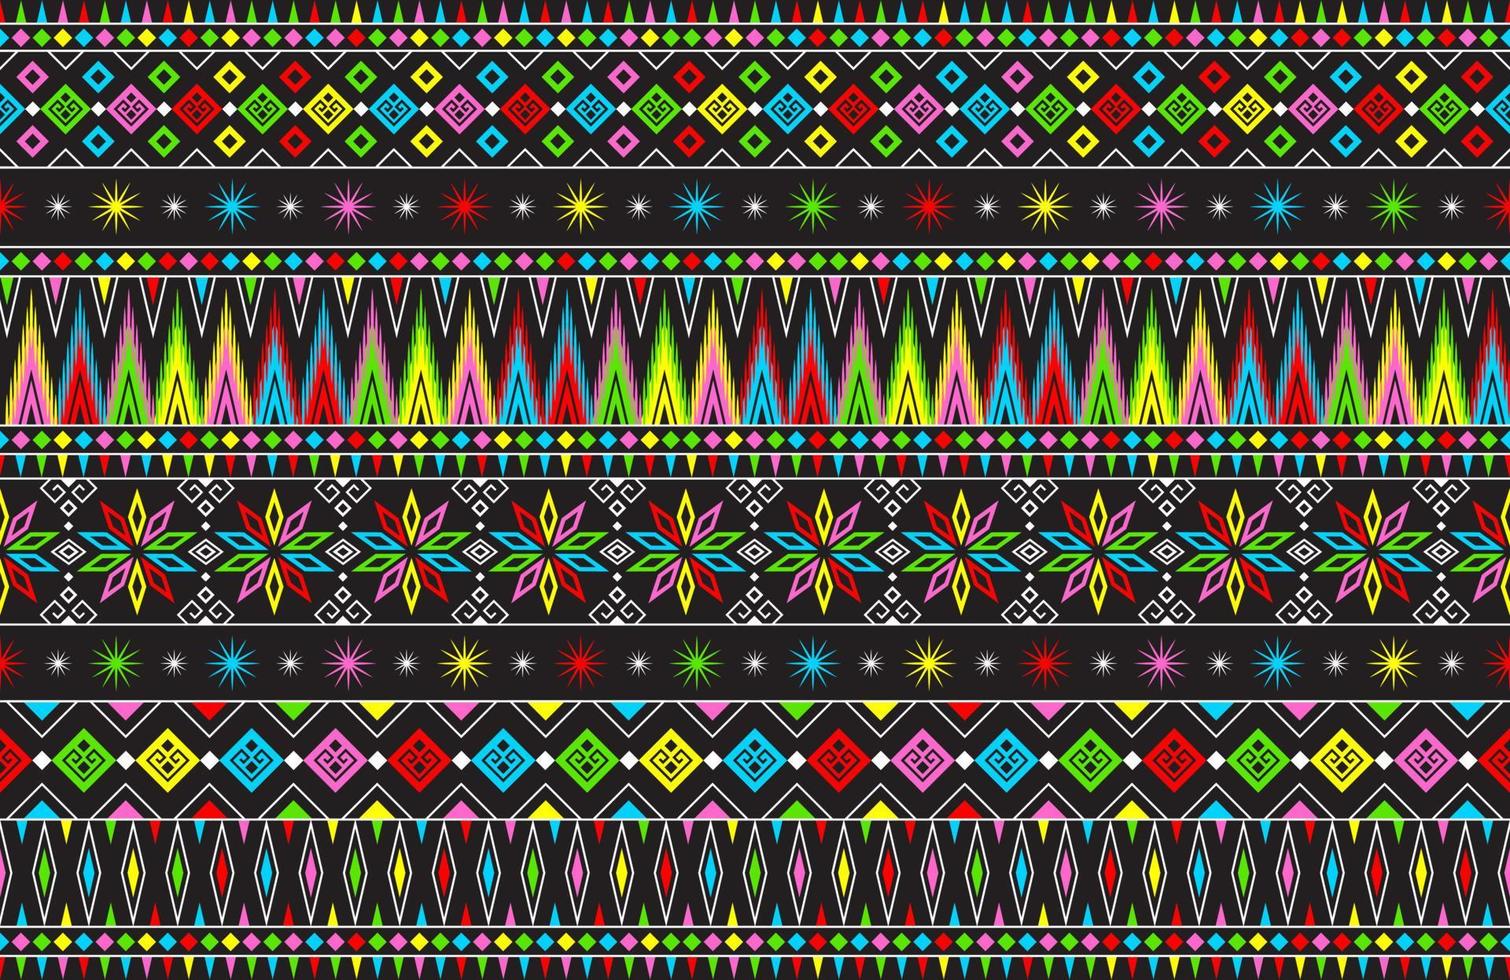 Abstract cute color geometric tribal ethnic ikat folklore argyle oriental native pattern traditional design for background,carpet,wallpaper,clothing,fabric,wrapping,print,batik,folk,knit,stripe vector